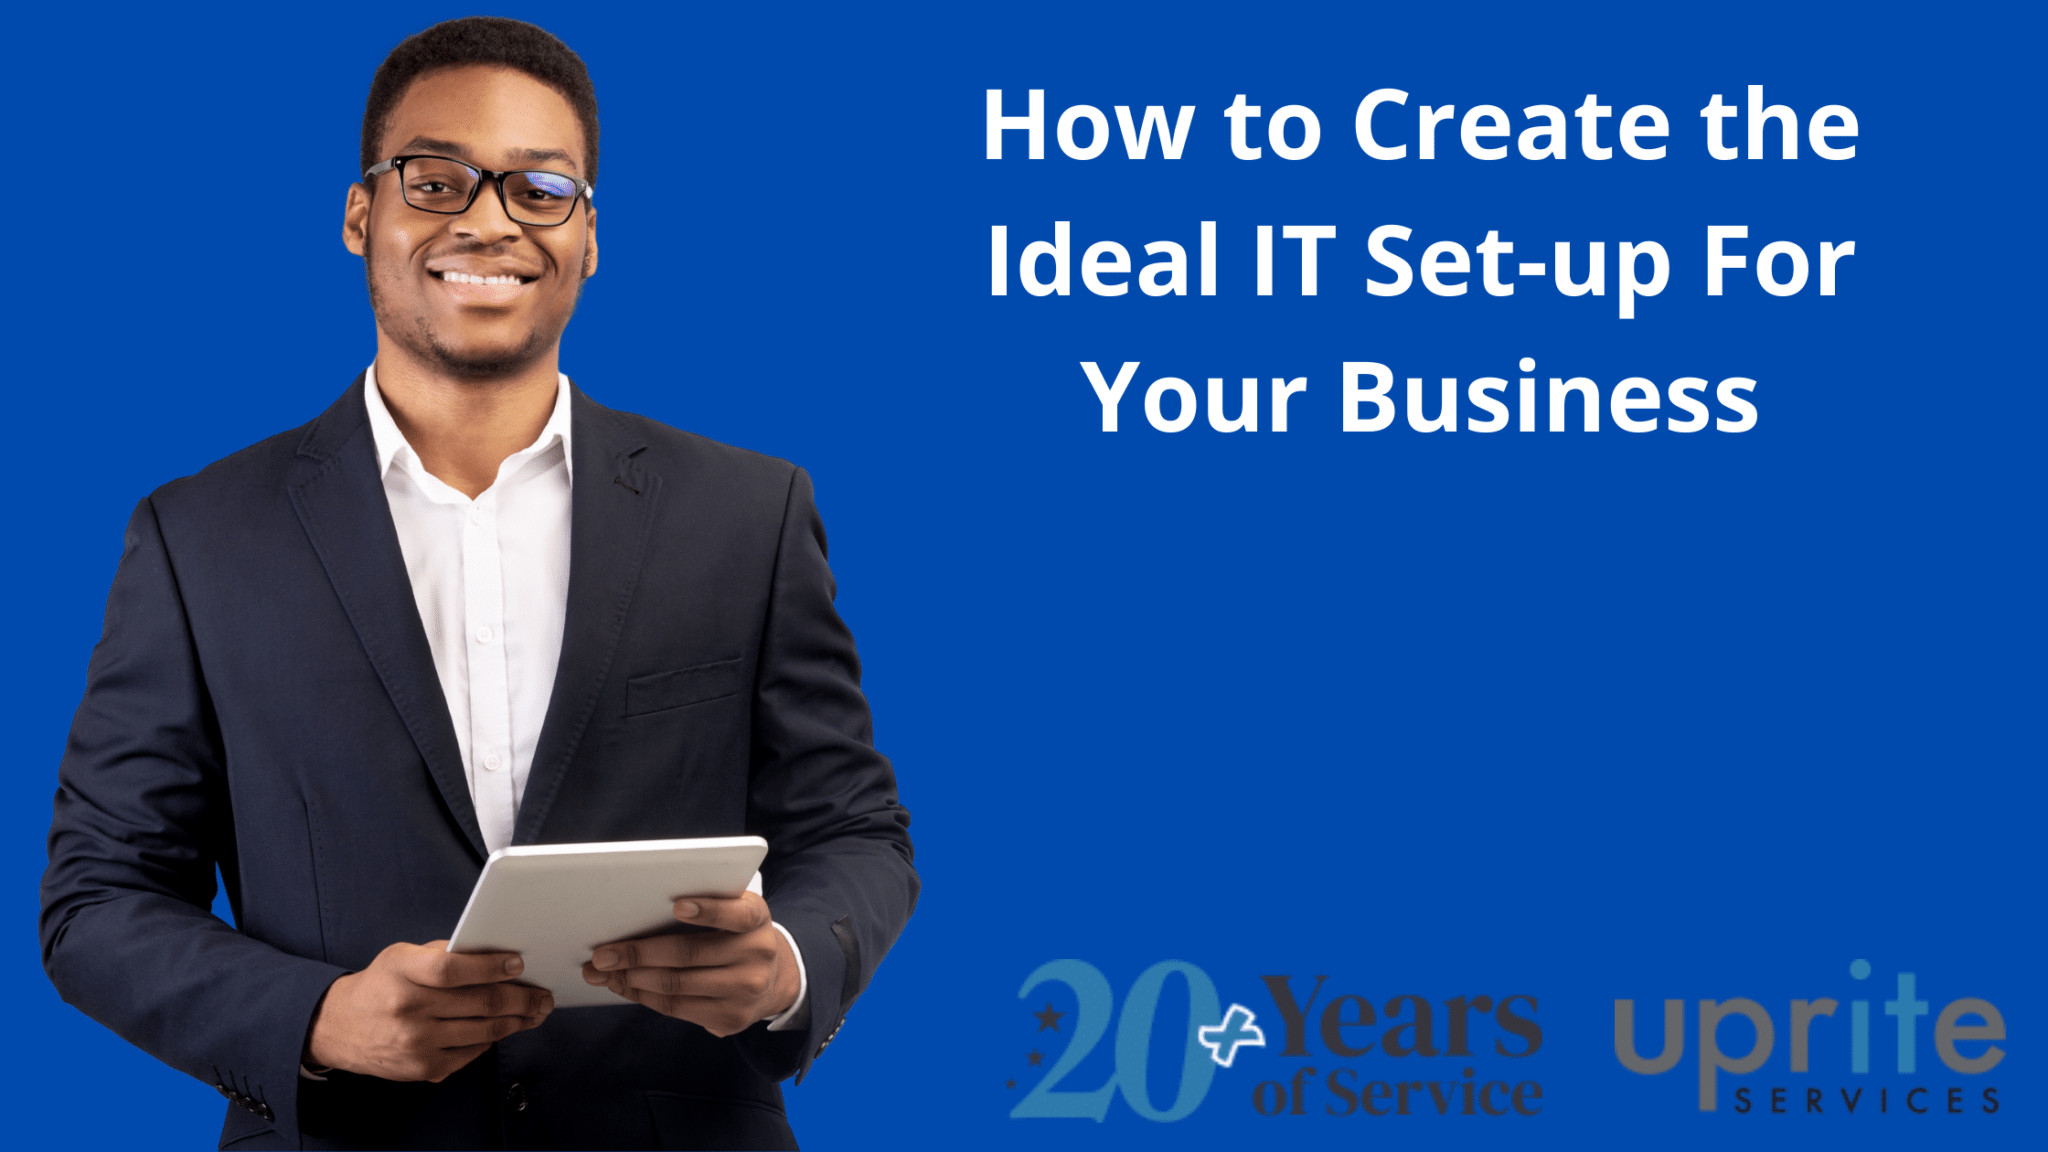 How to Create the Ideal IT Set-up For Your Business